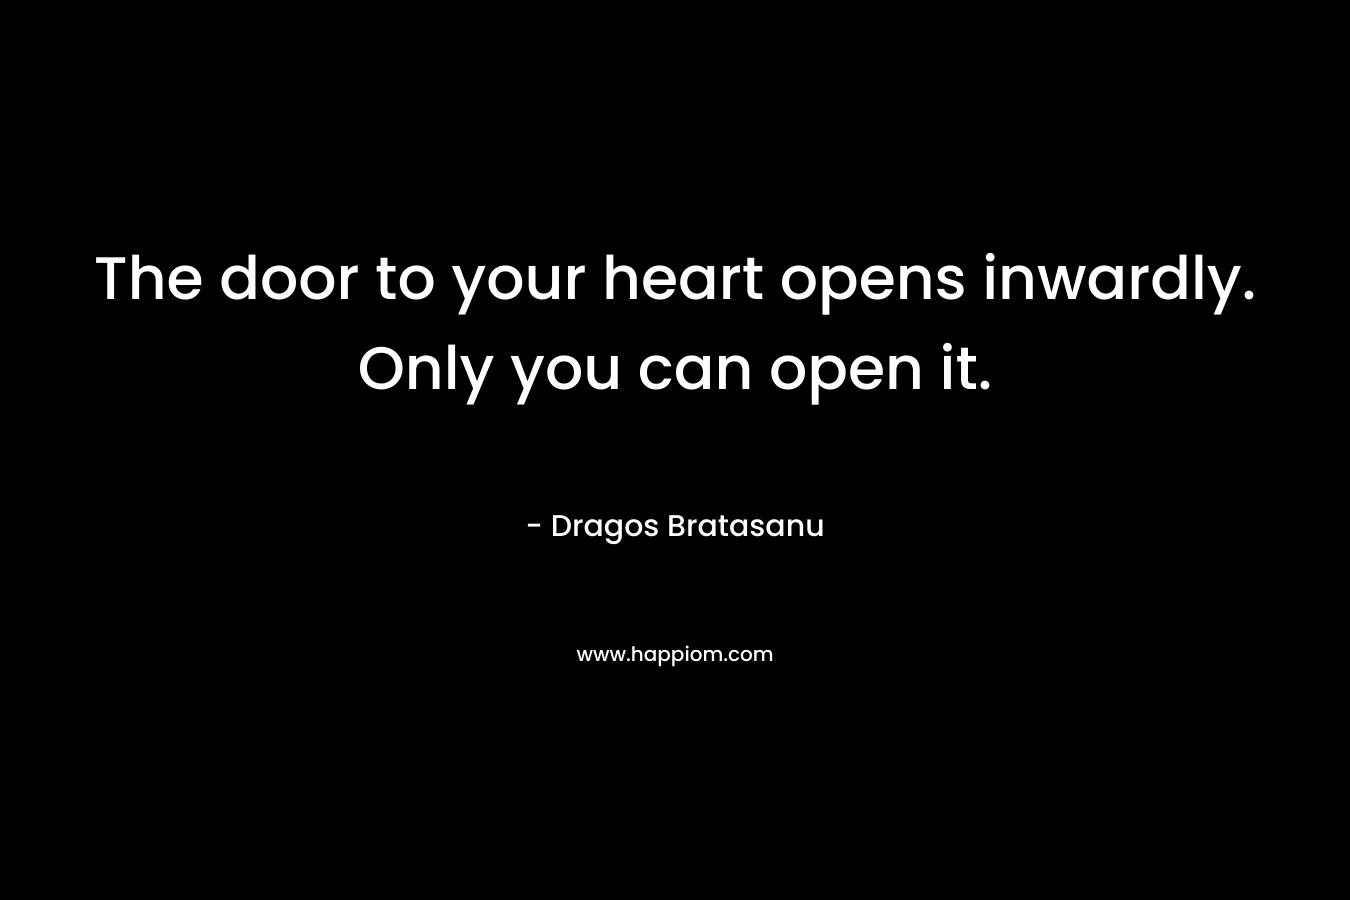 The door to your heart opens inwardly. Only you can open it. – Dragos Bratasanu